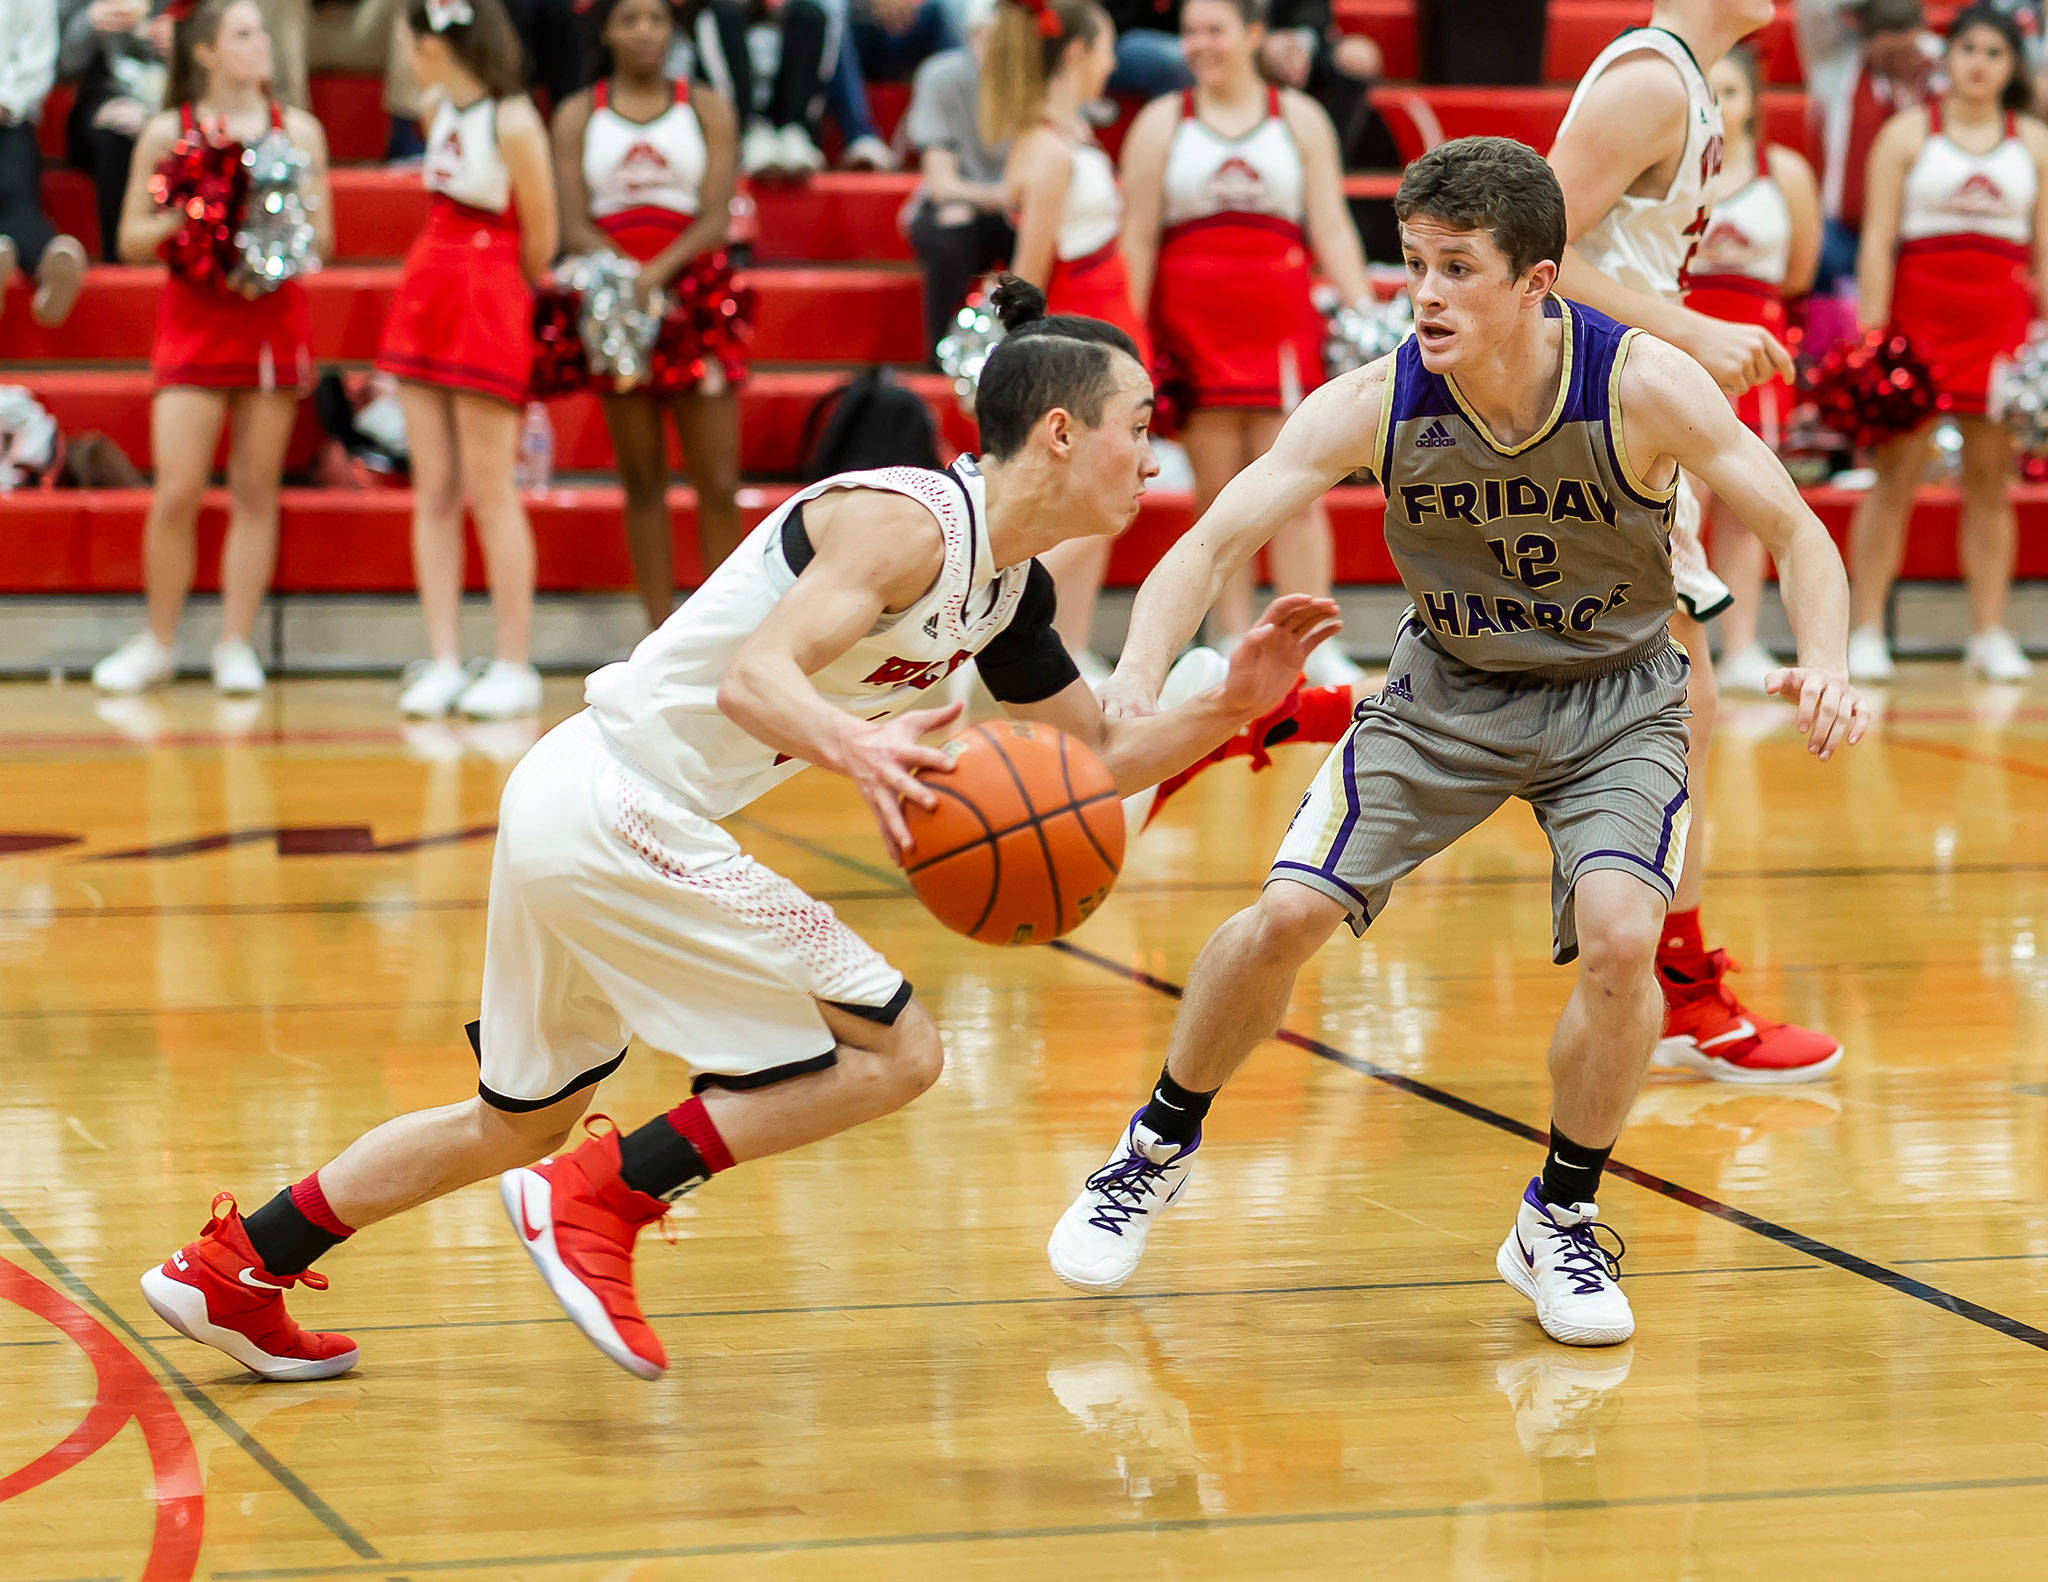 Coupeville’s Jered Brown, left, attempts to beat Friday Harbor’s Ethan Germain off the dribble. (Photo by John Fisken)